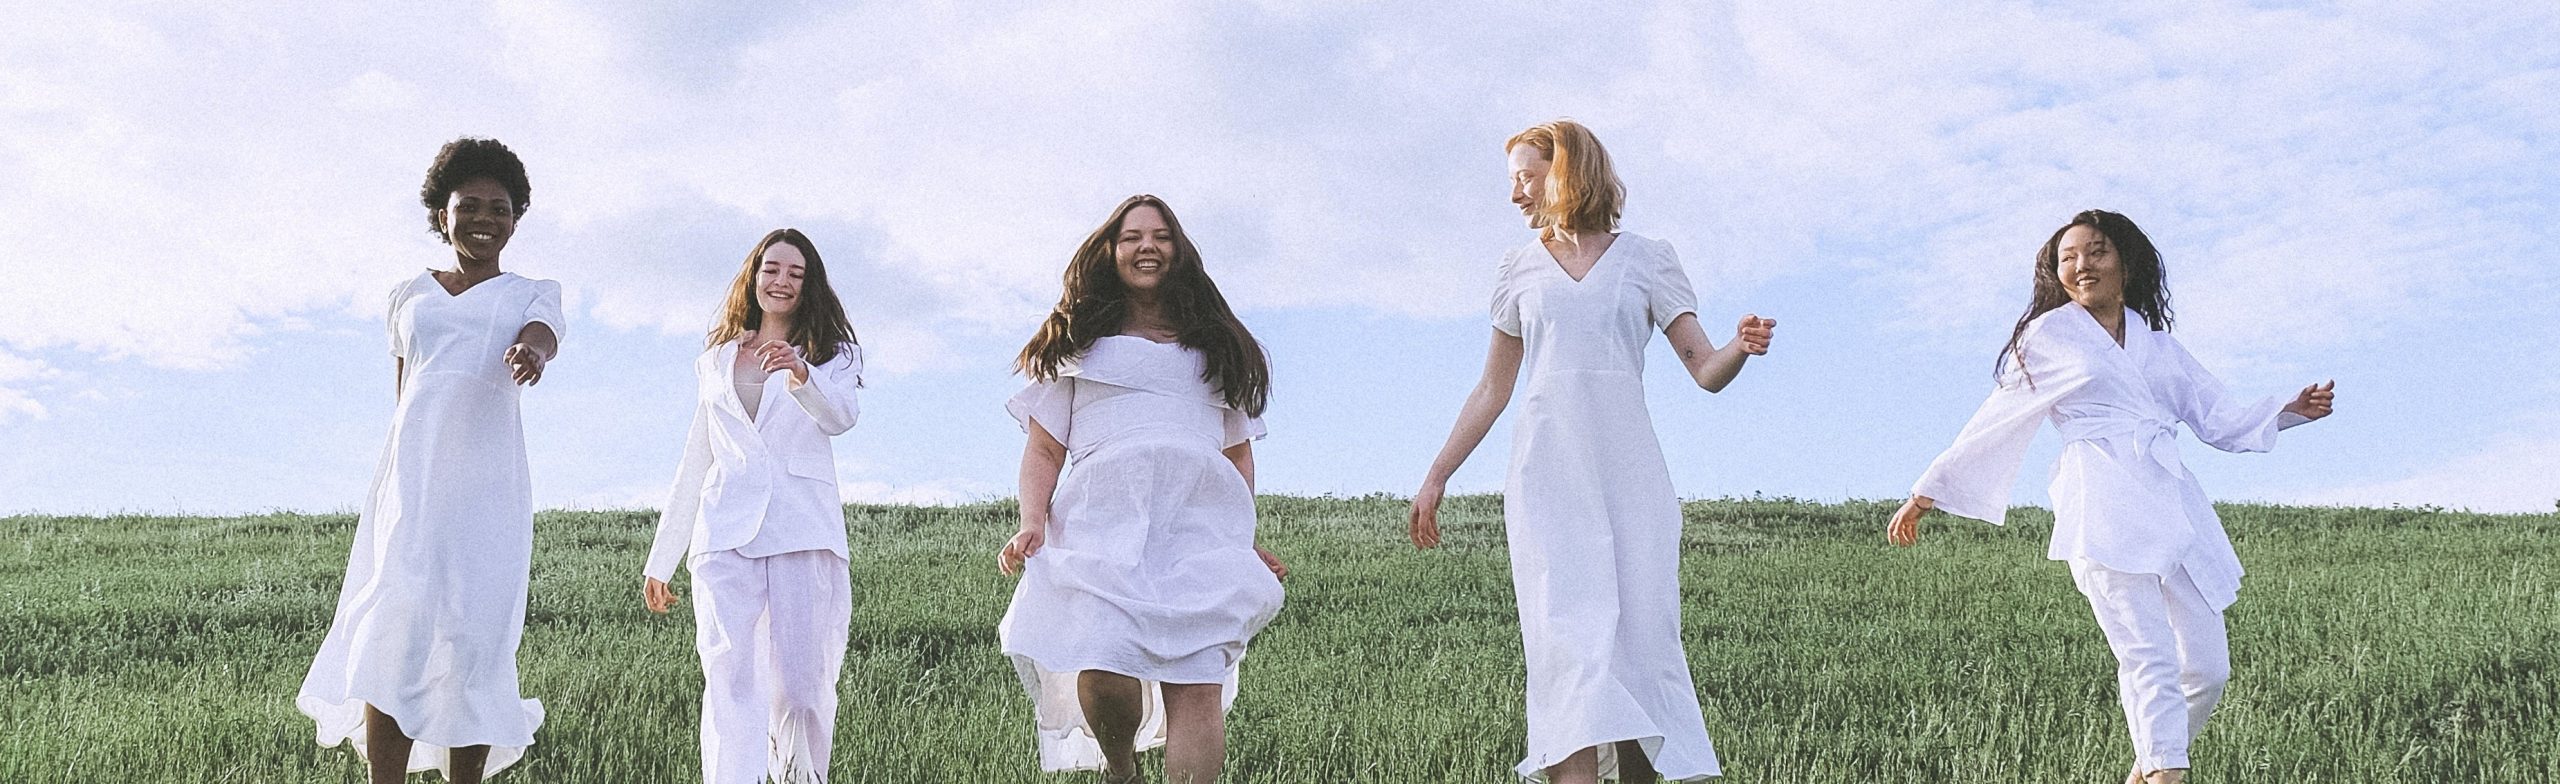 five women of different skin colour and cultural background, all wearing white clothes, walking together across a field of green grass, smiling